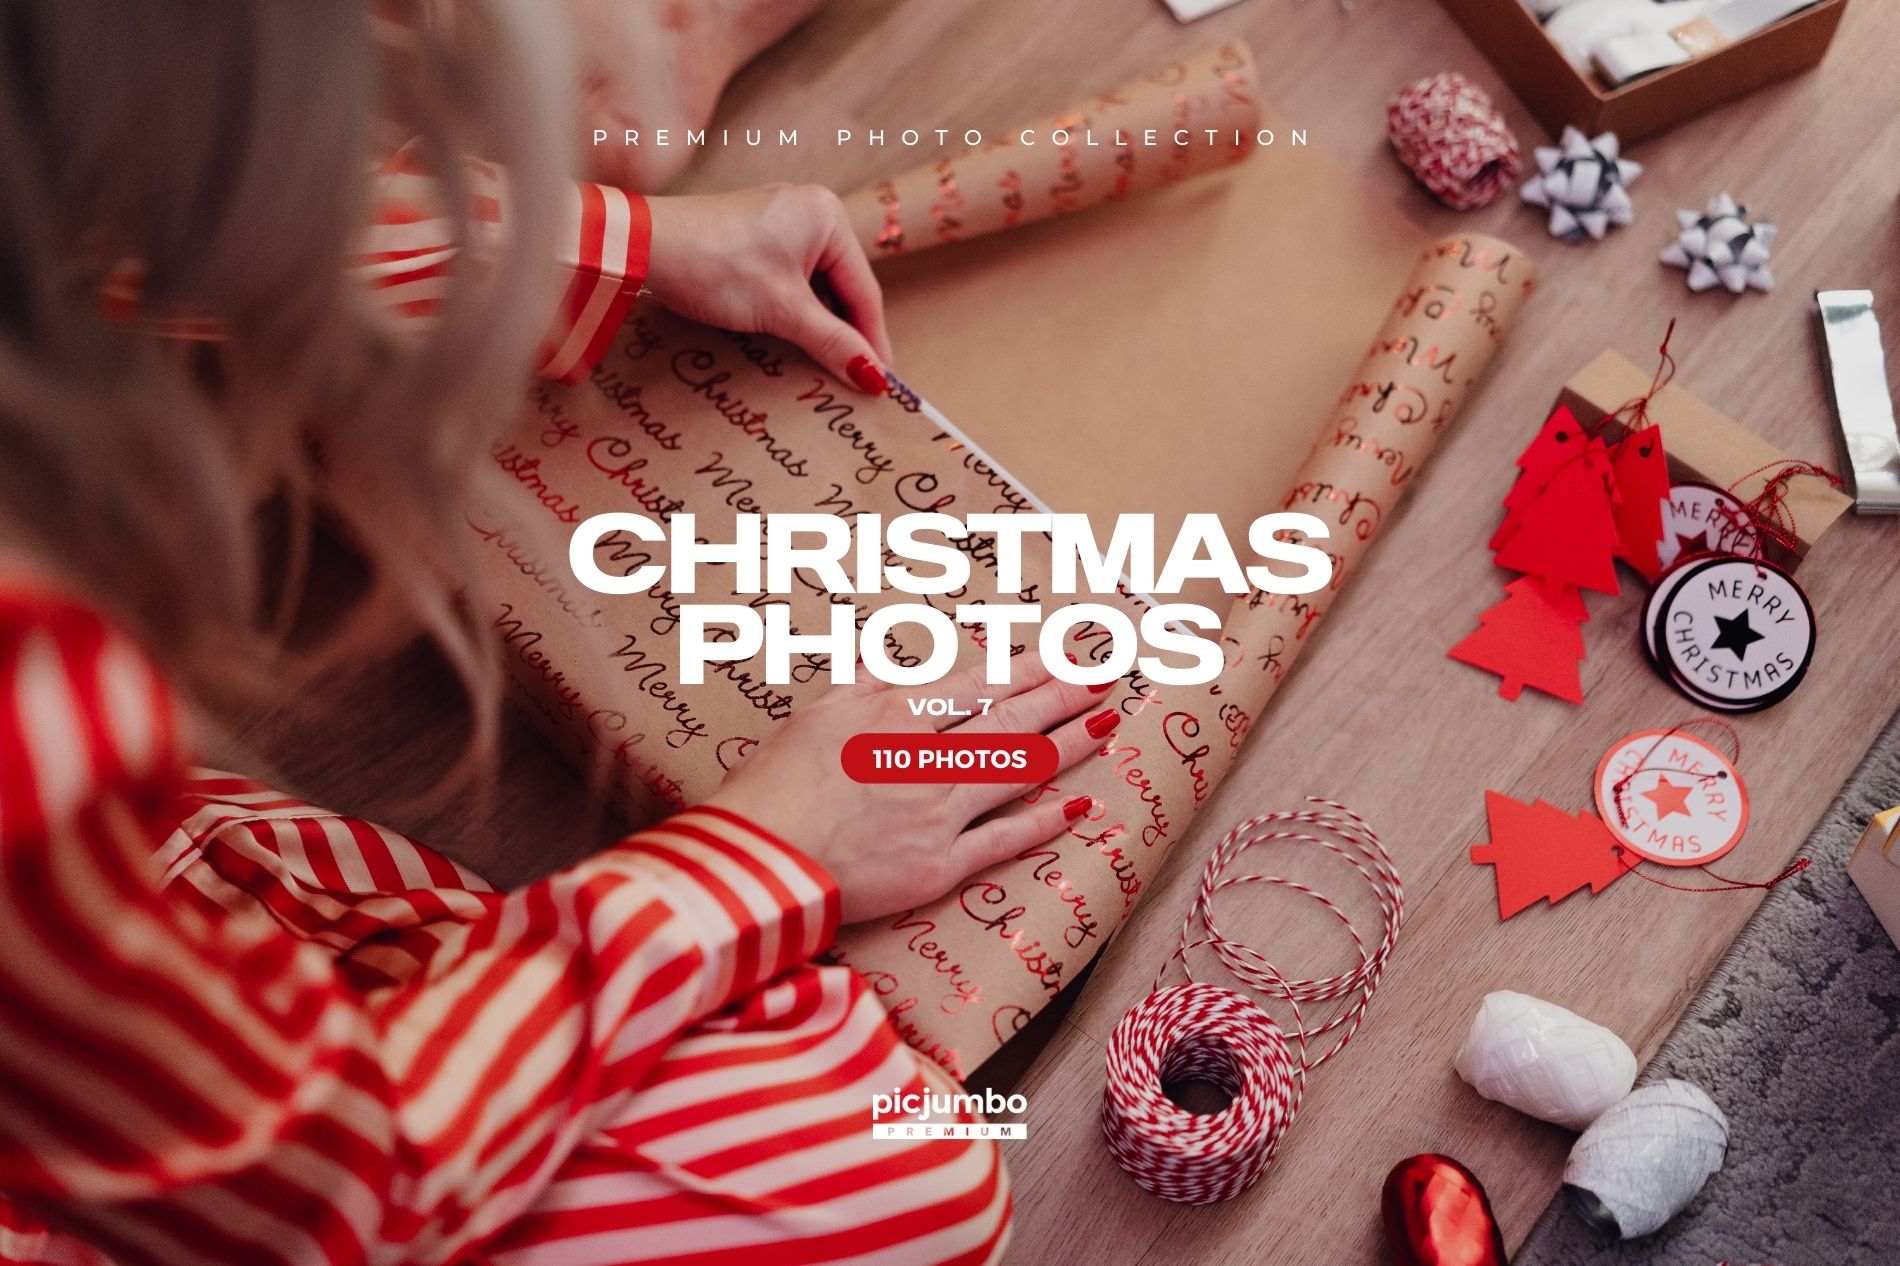 Download hi-res stock photos from our Christmas Photos Vol. 7 PREMIUM Collection!